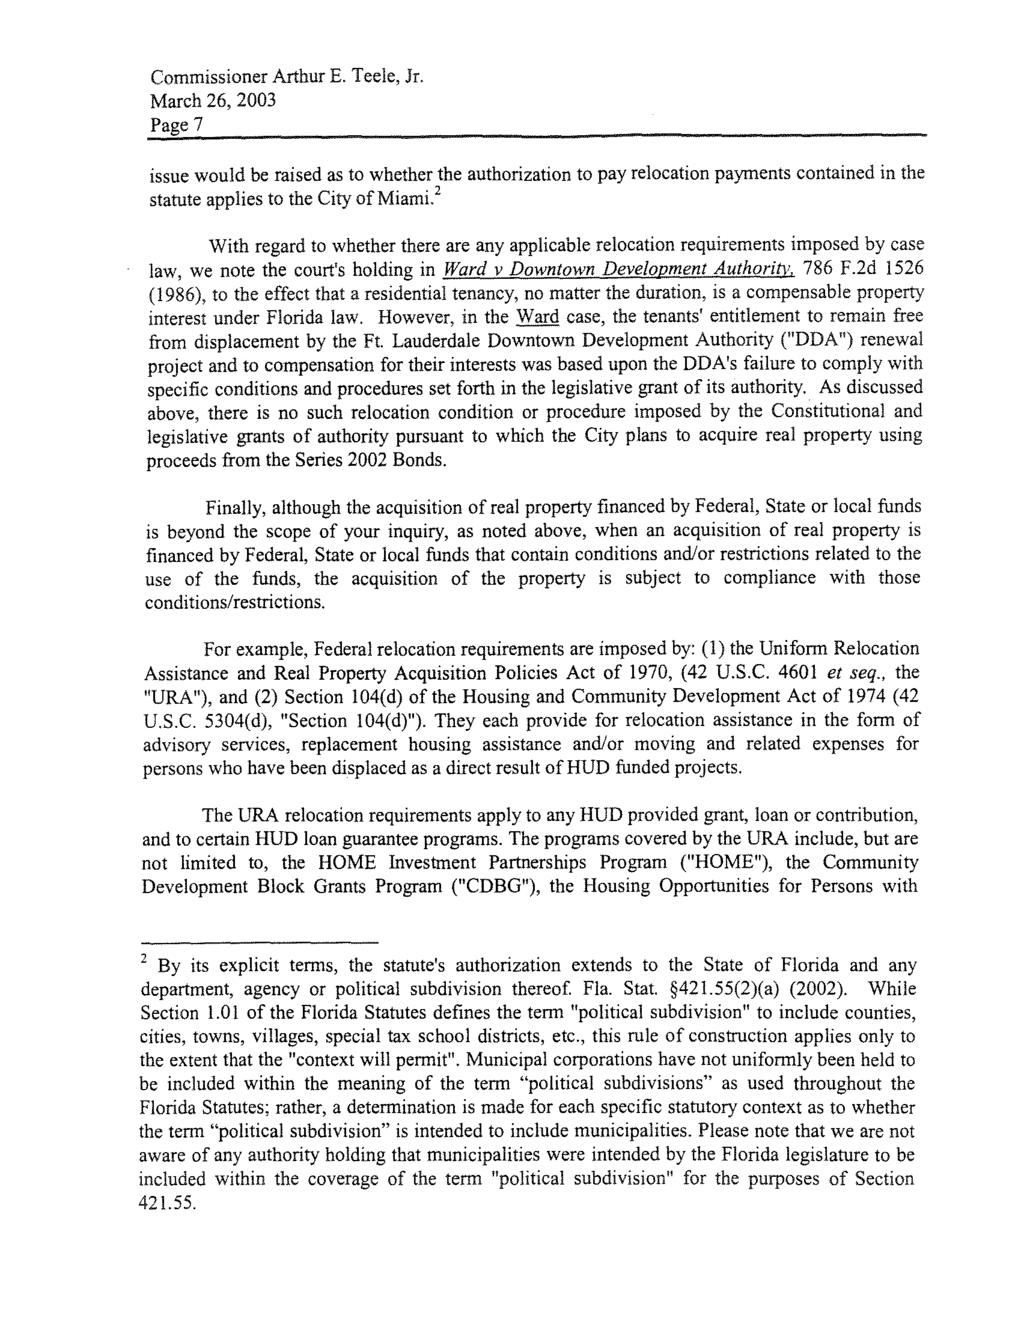 Commissioner Arthur E. Teele, 7r. Page 7 issue would be raised as to whether the authorization to pay relocation payments contained in the statute applies to the City of Miami.